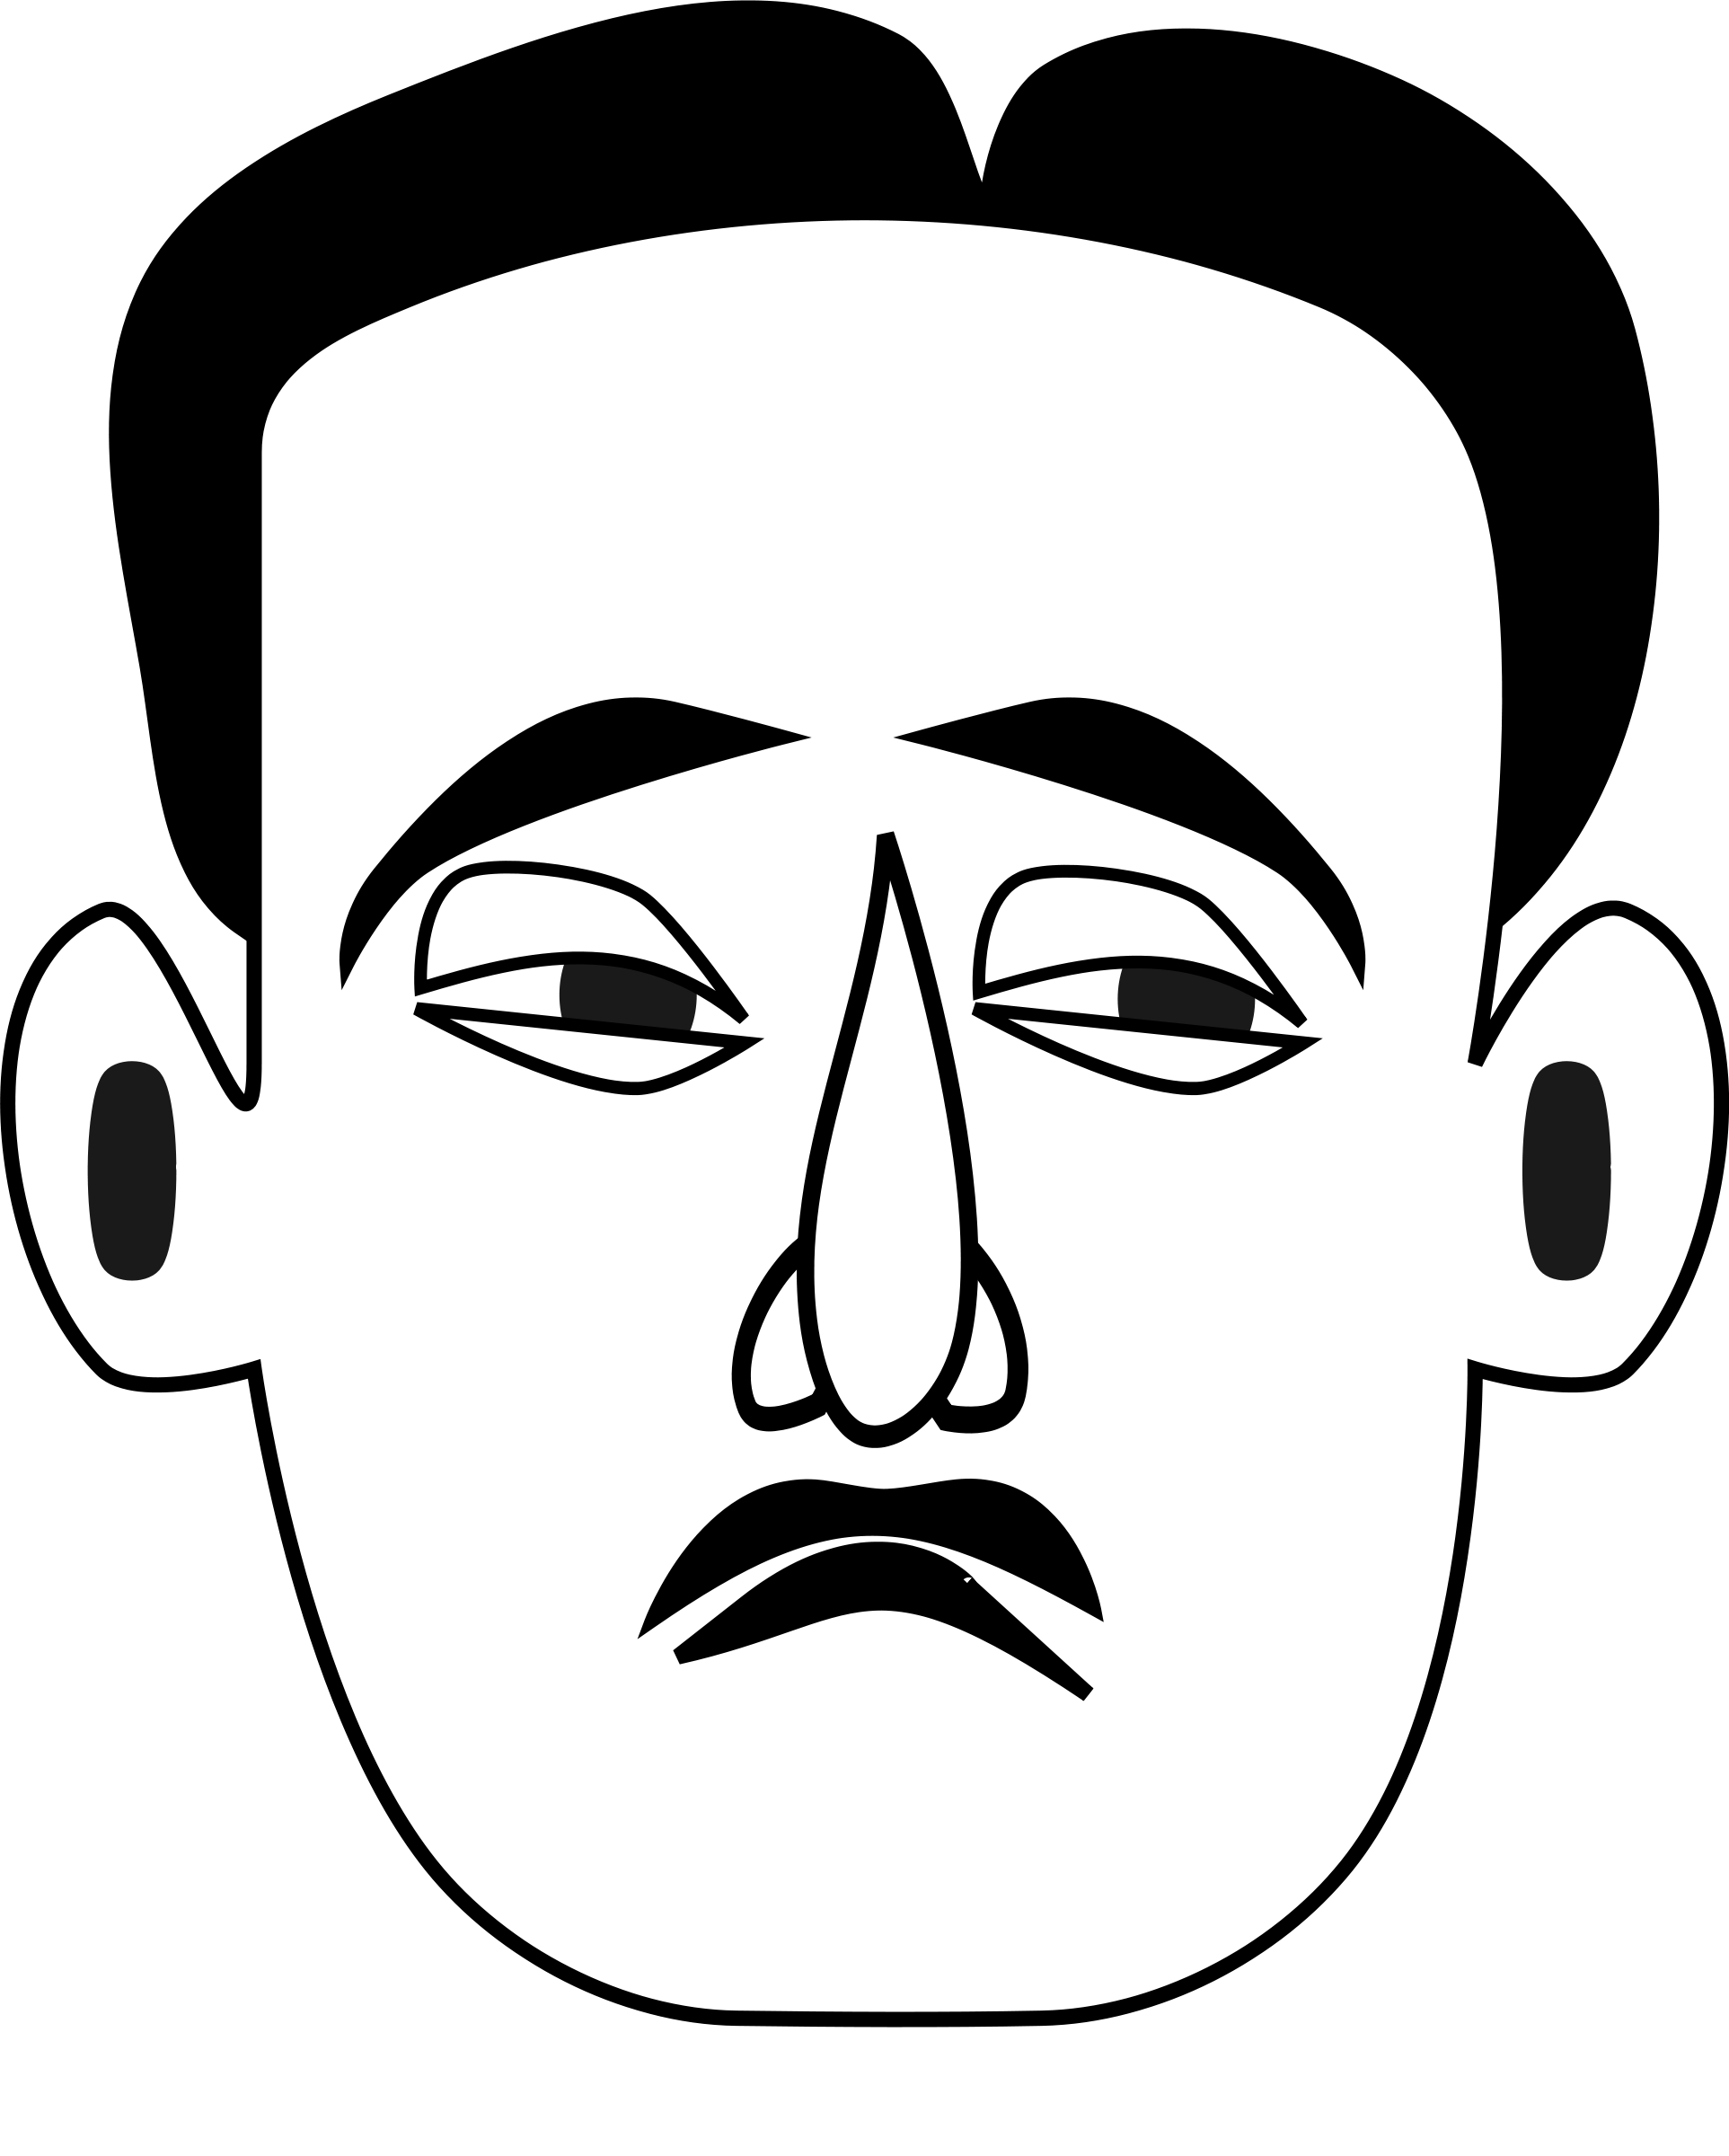 Sad face clipart black and white